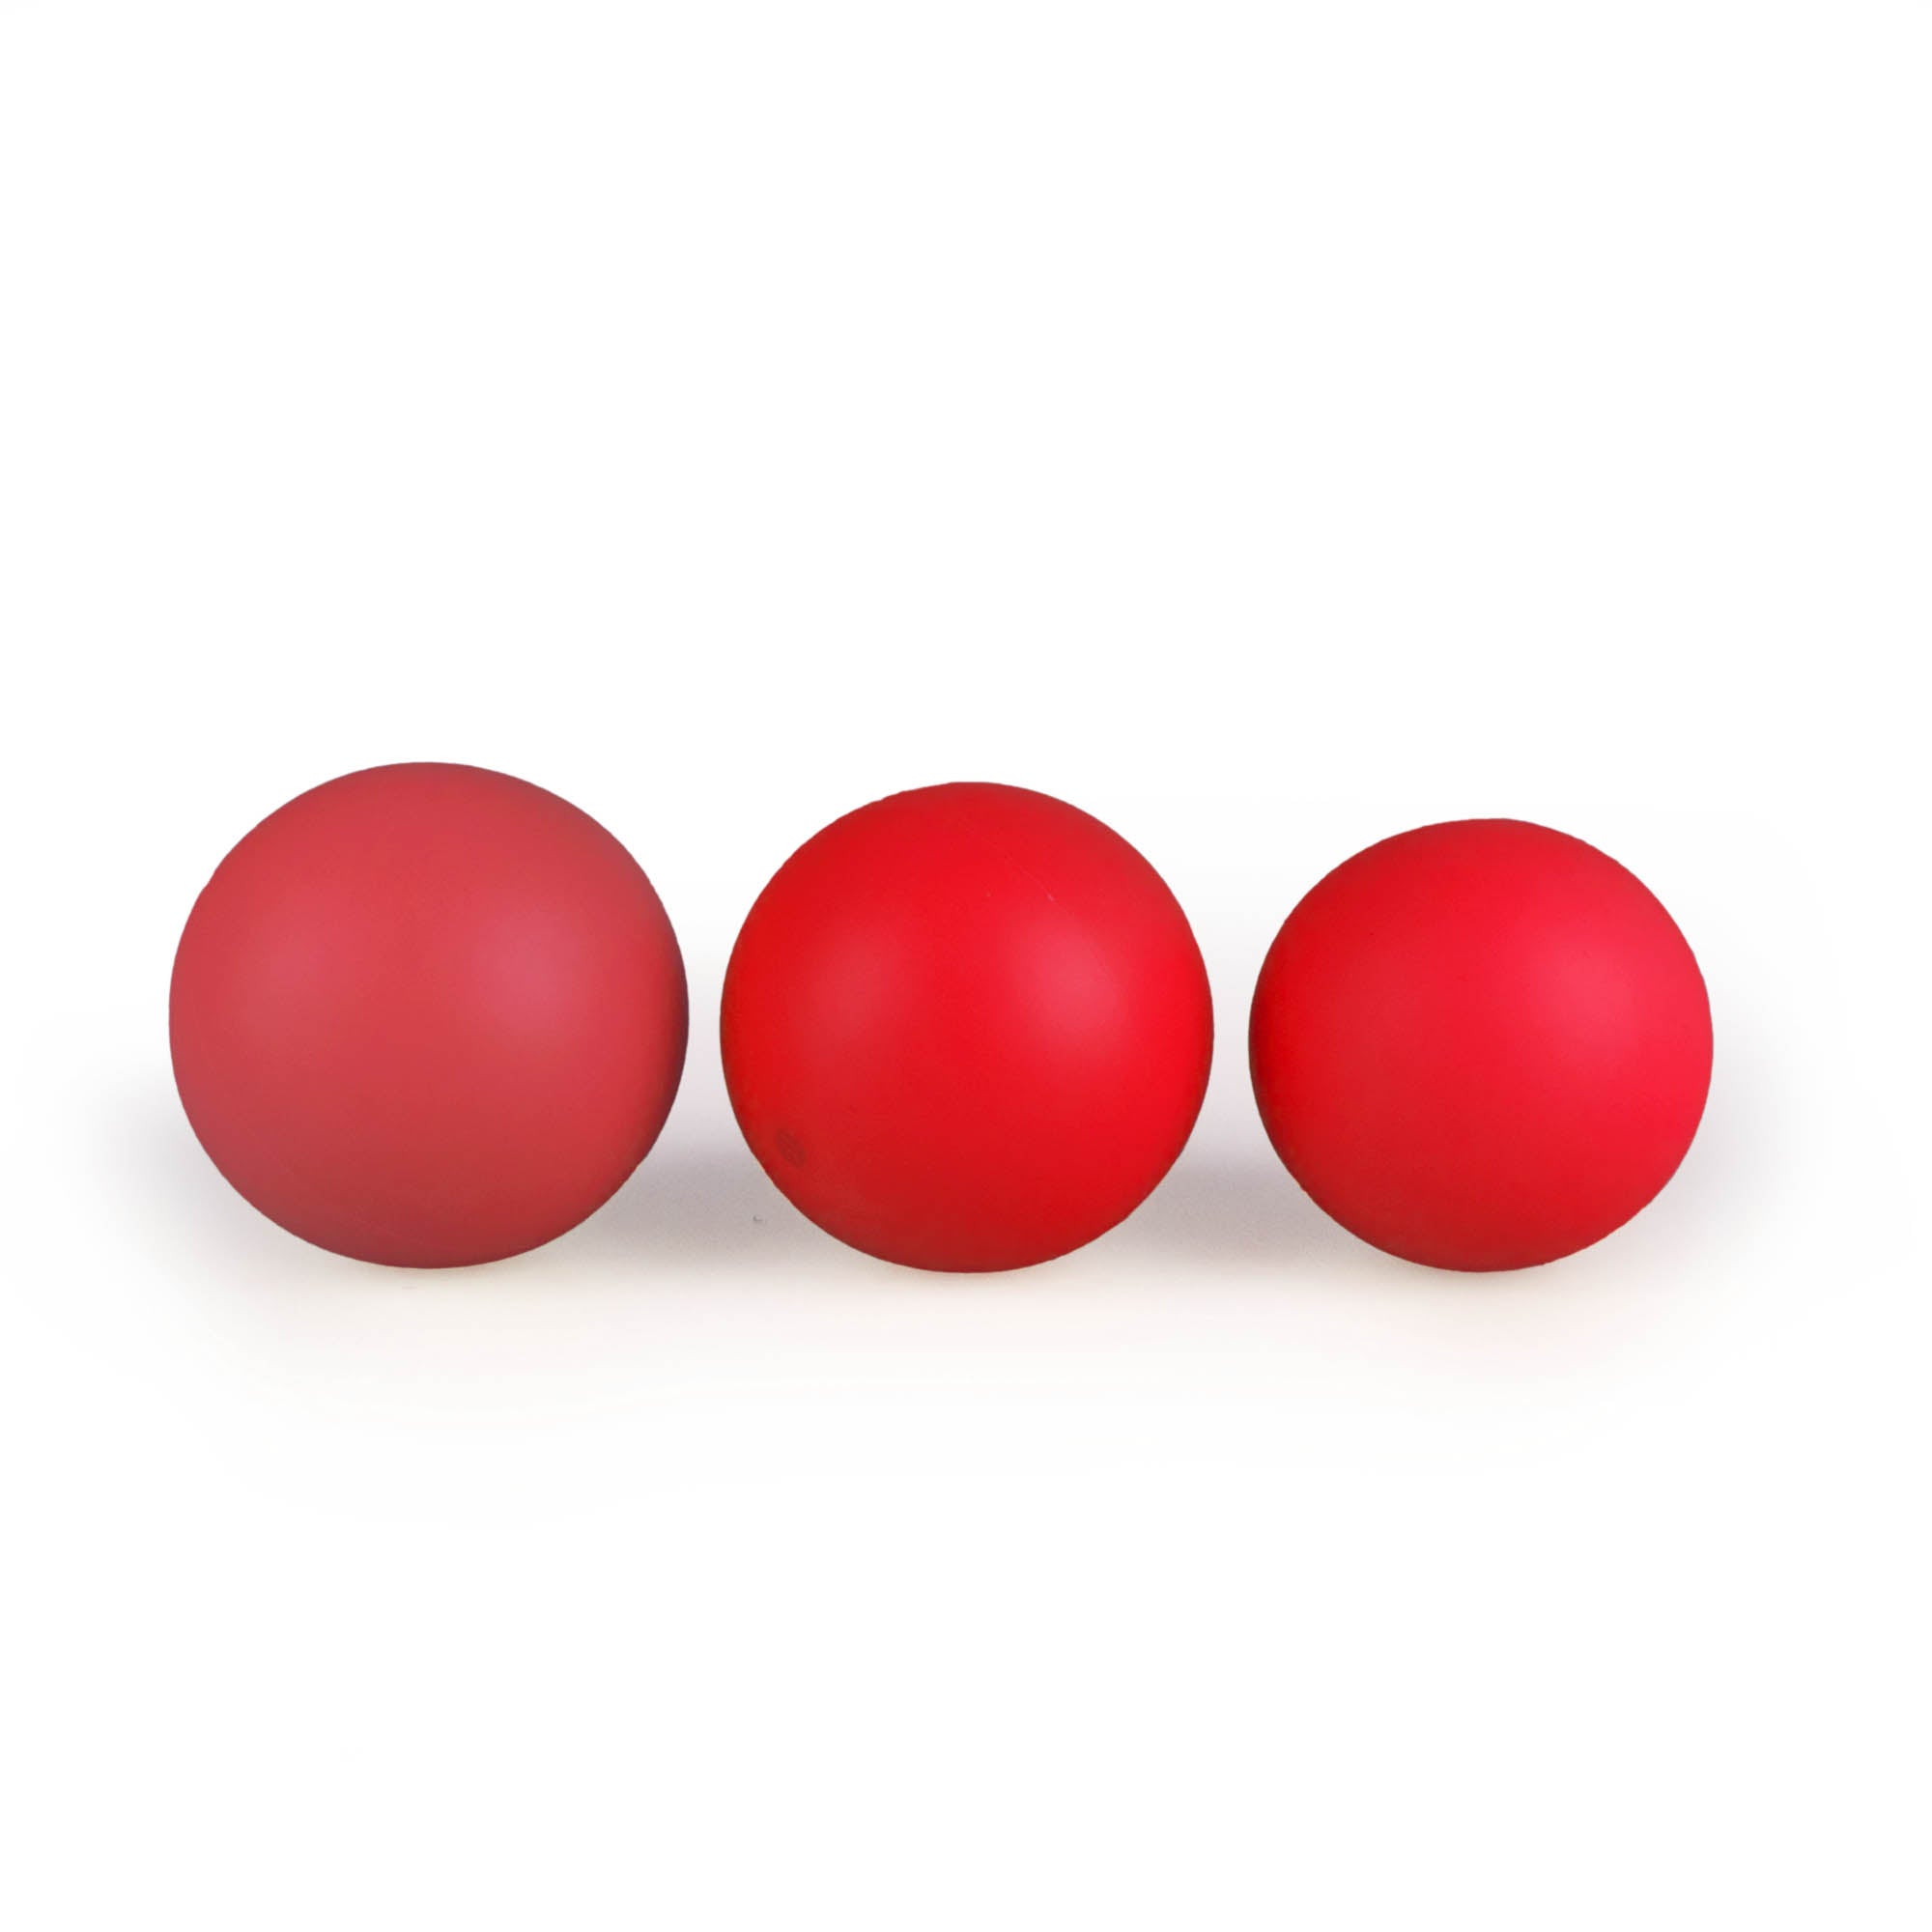 MMX juggling ball comparison in red